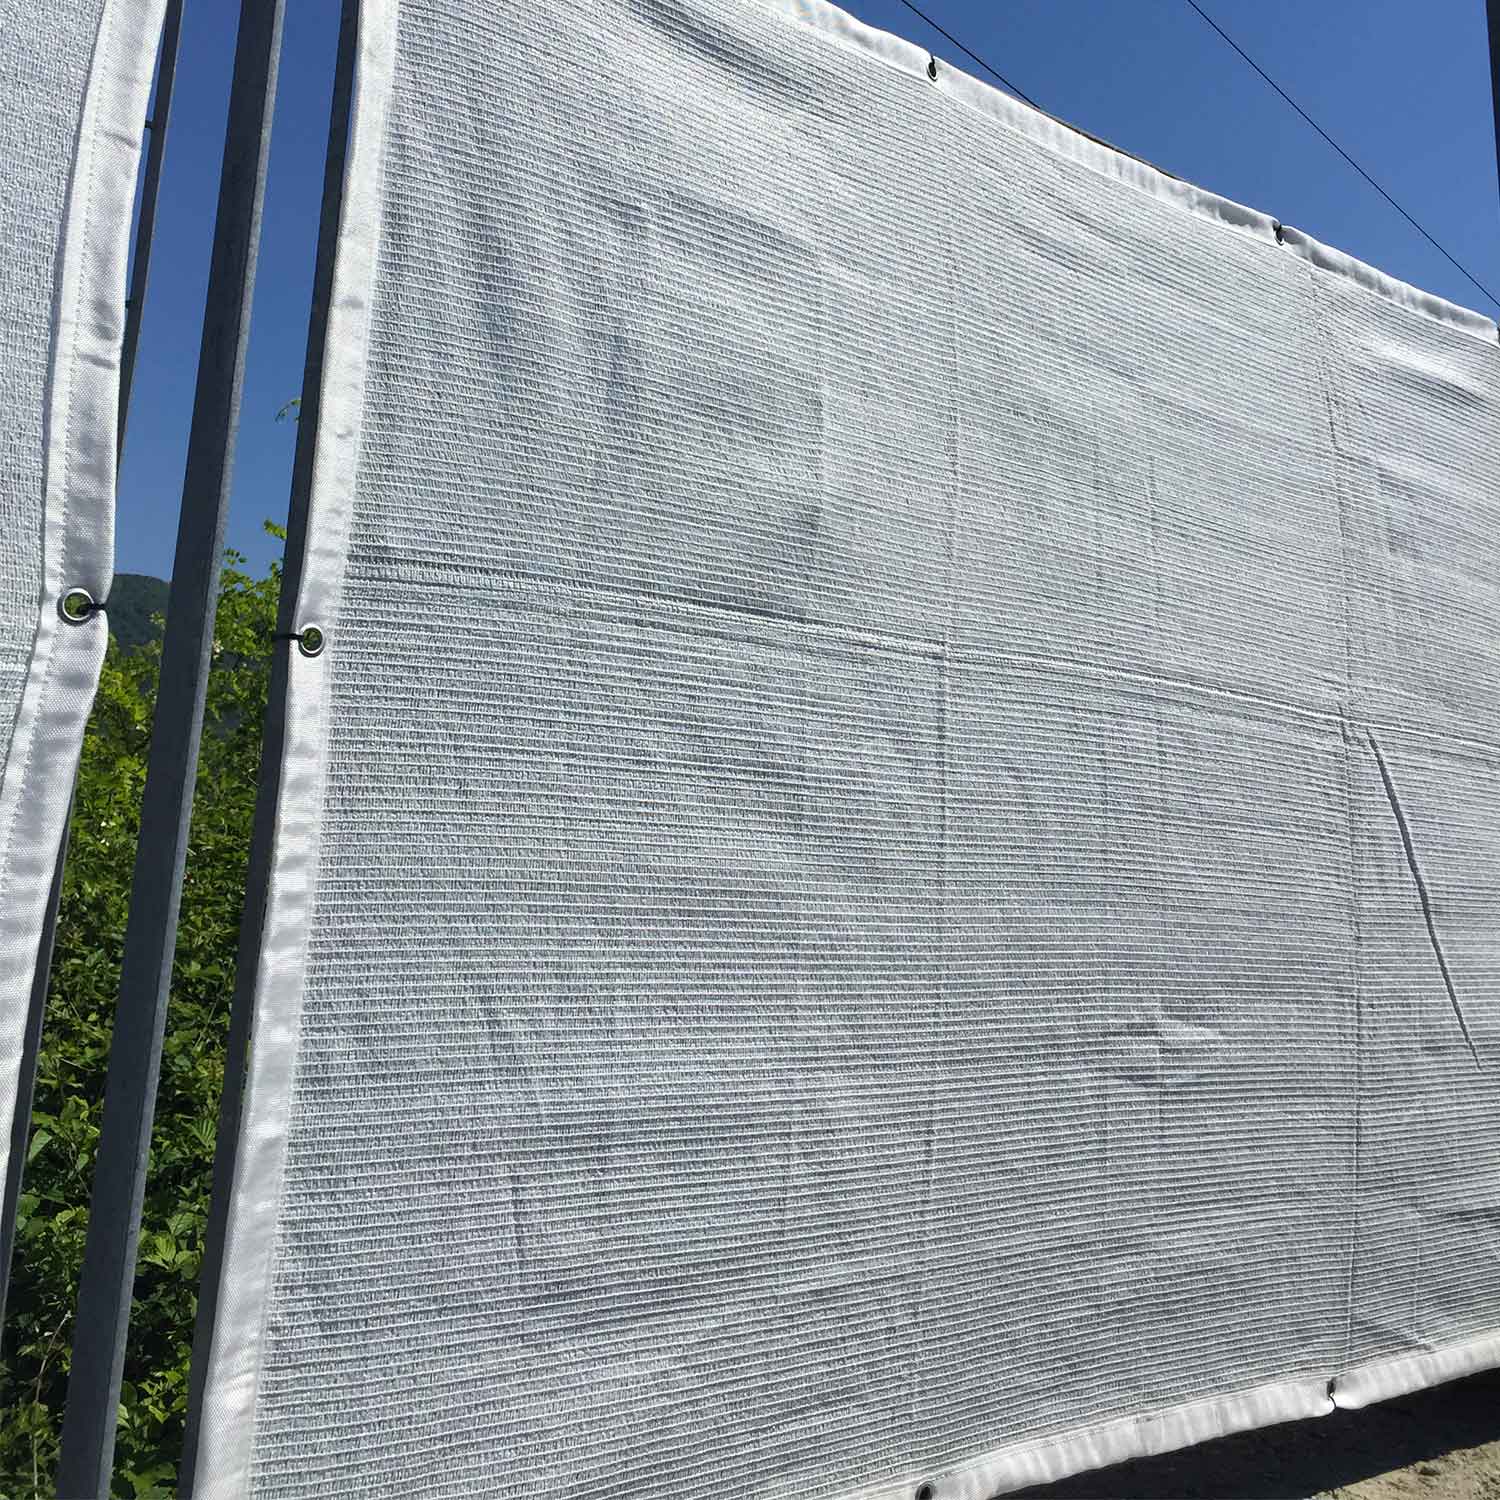 Nets and sheets for covering parking lots